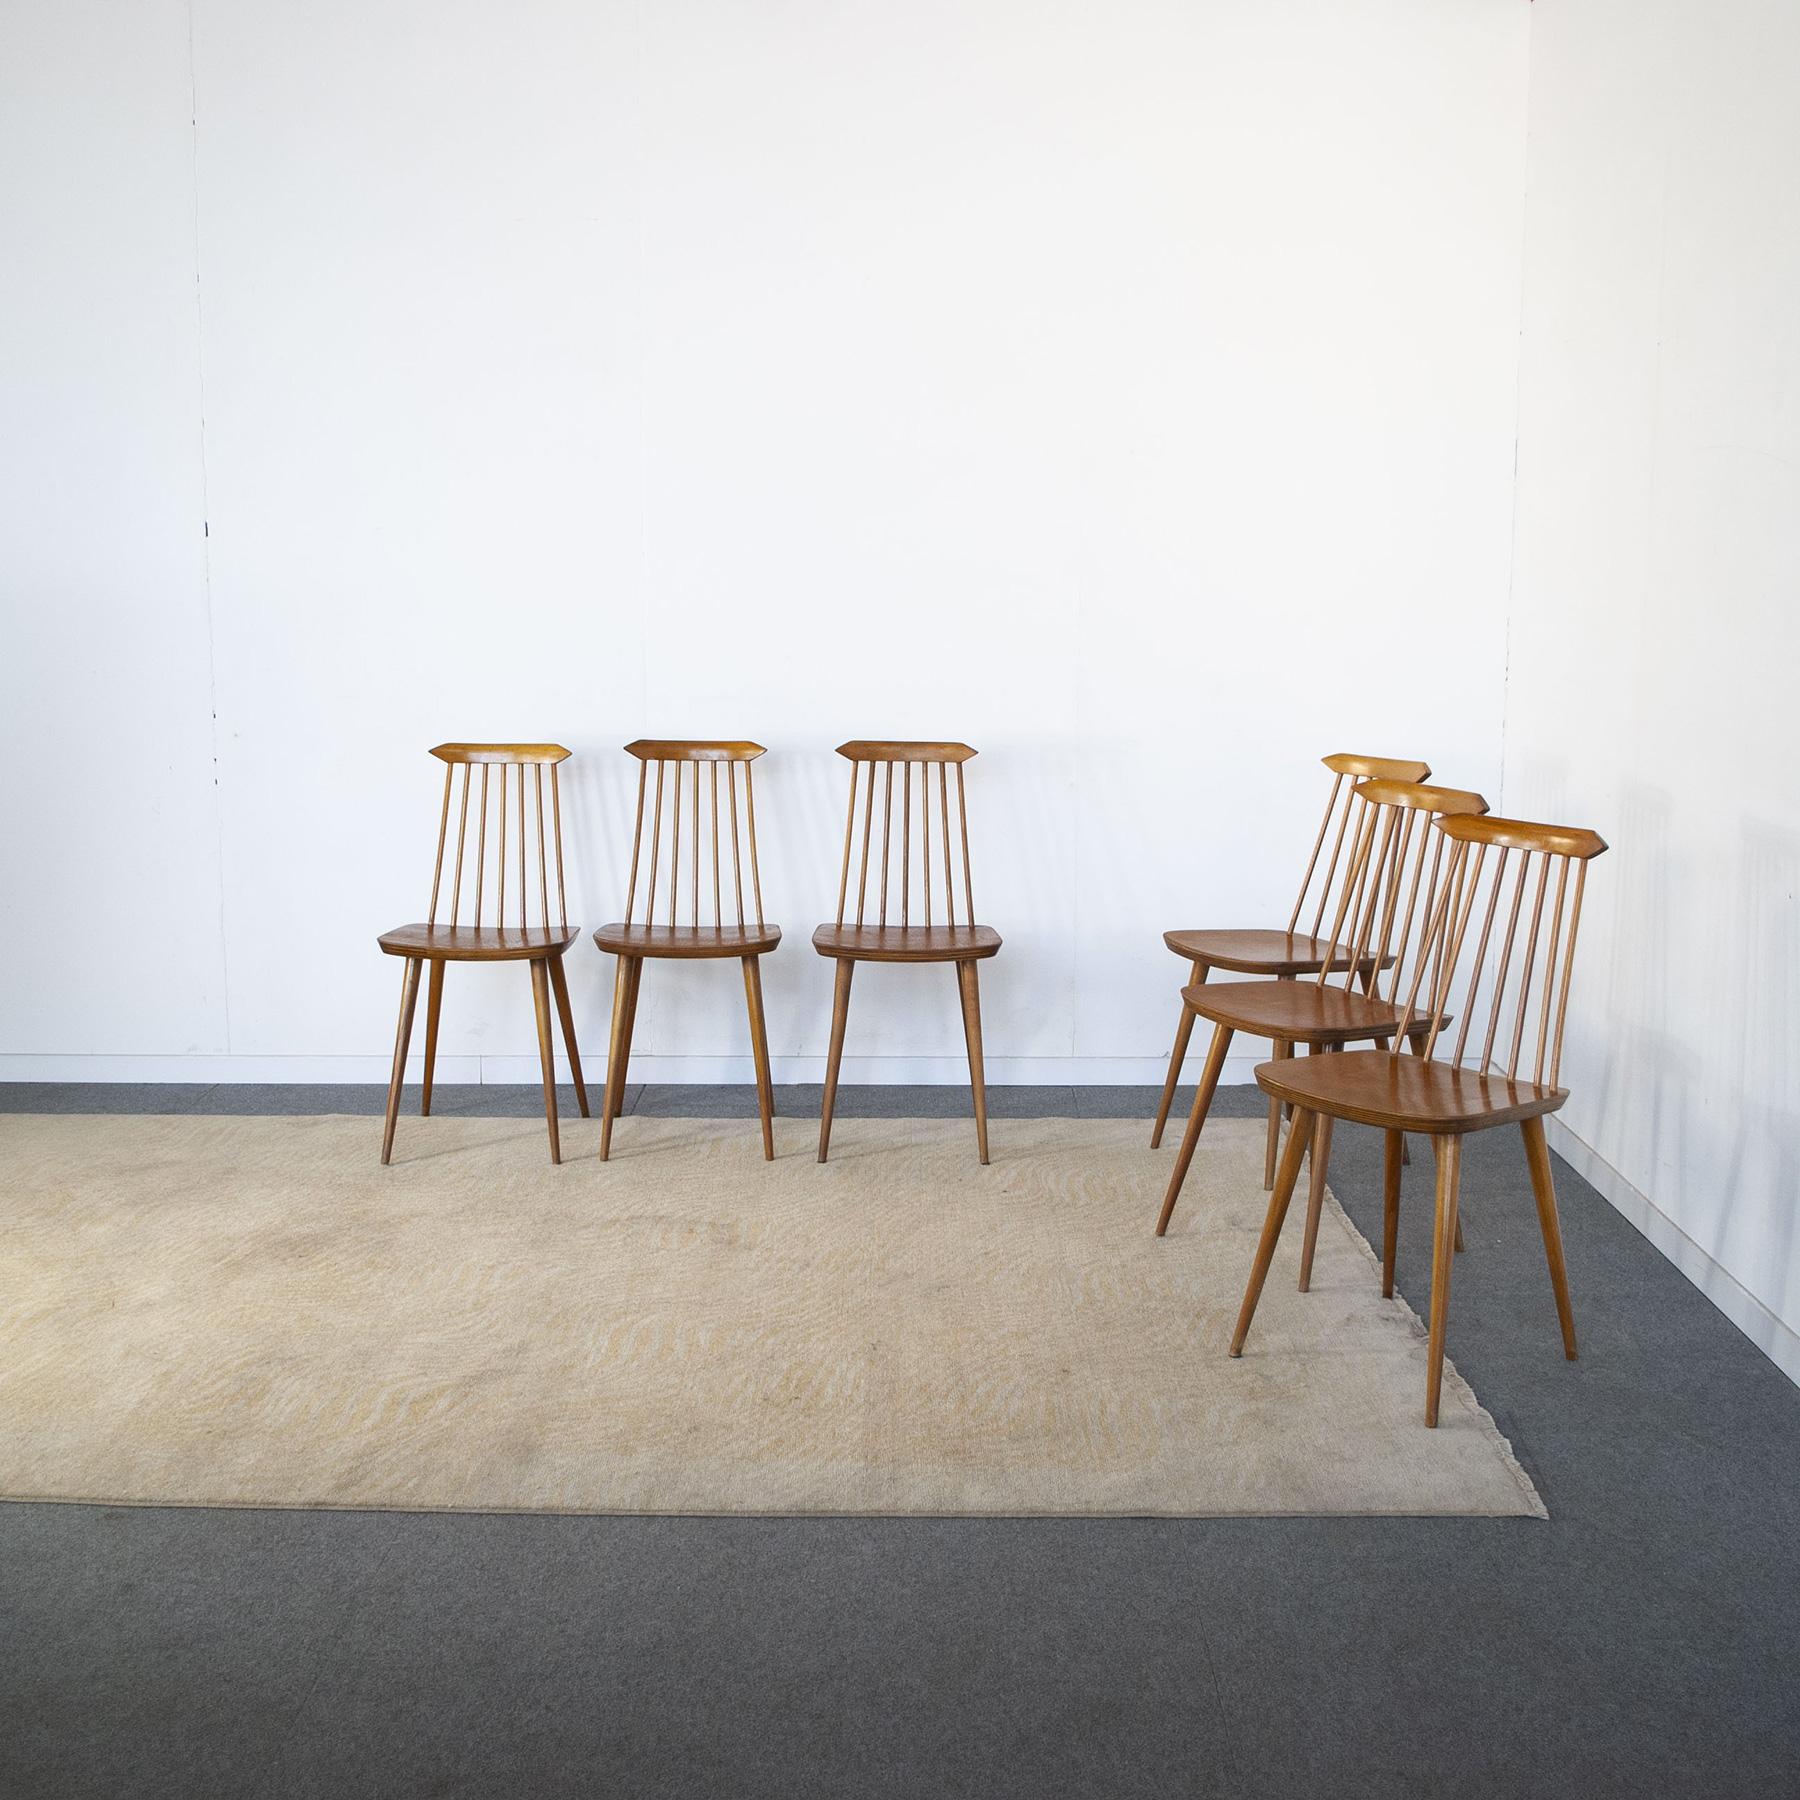 Set of six chairs in the style of Danish designer Folke Pålsson.